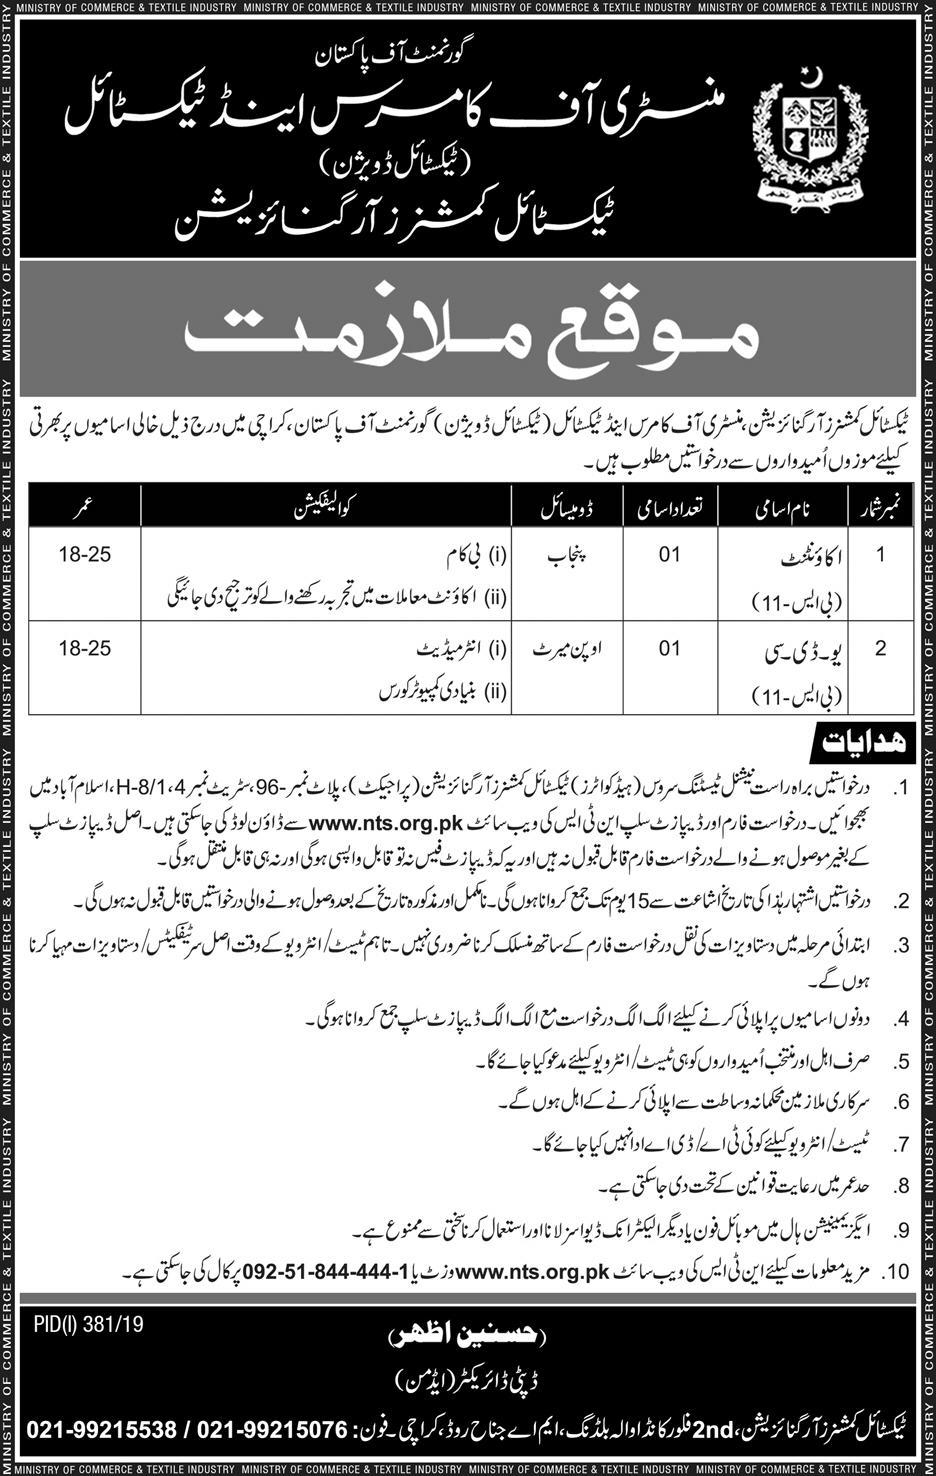 Ministry of Textile & Commerce Jobs July 2019